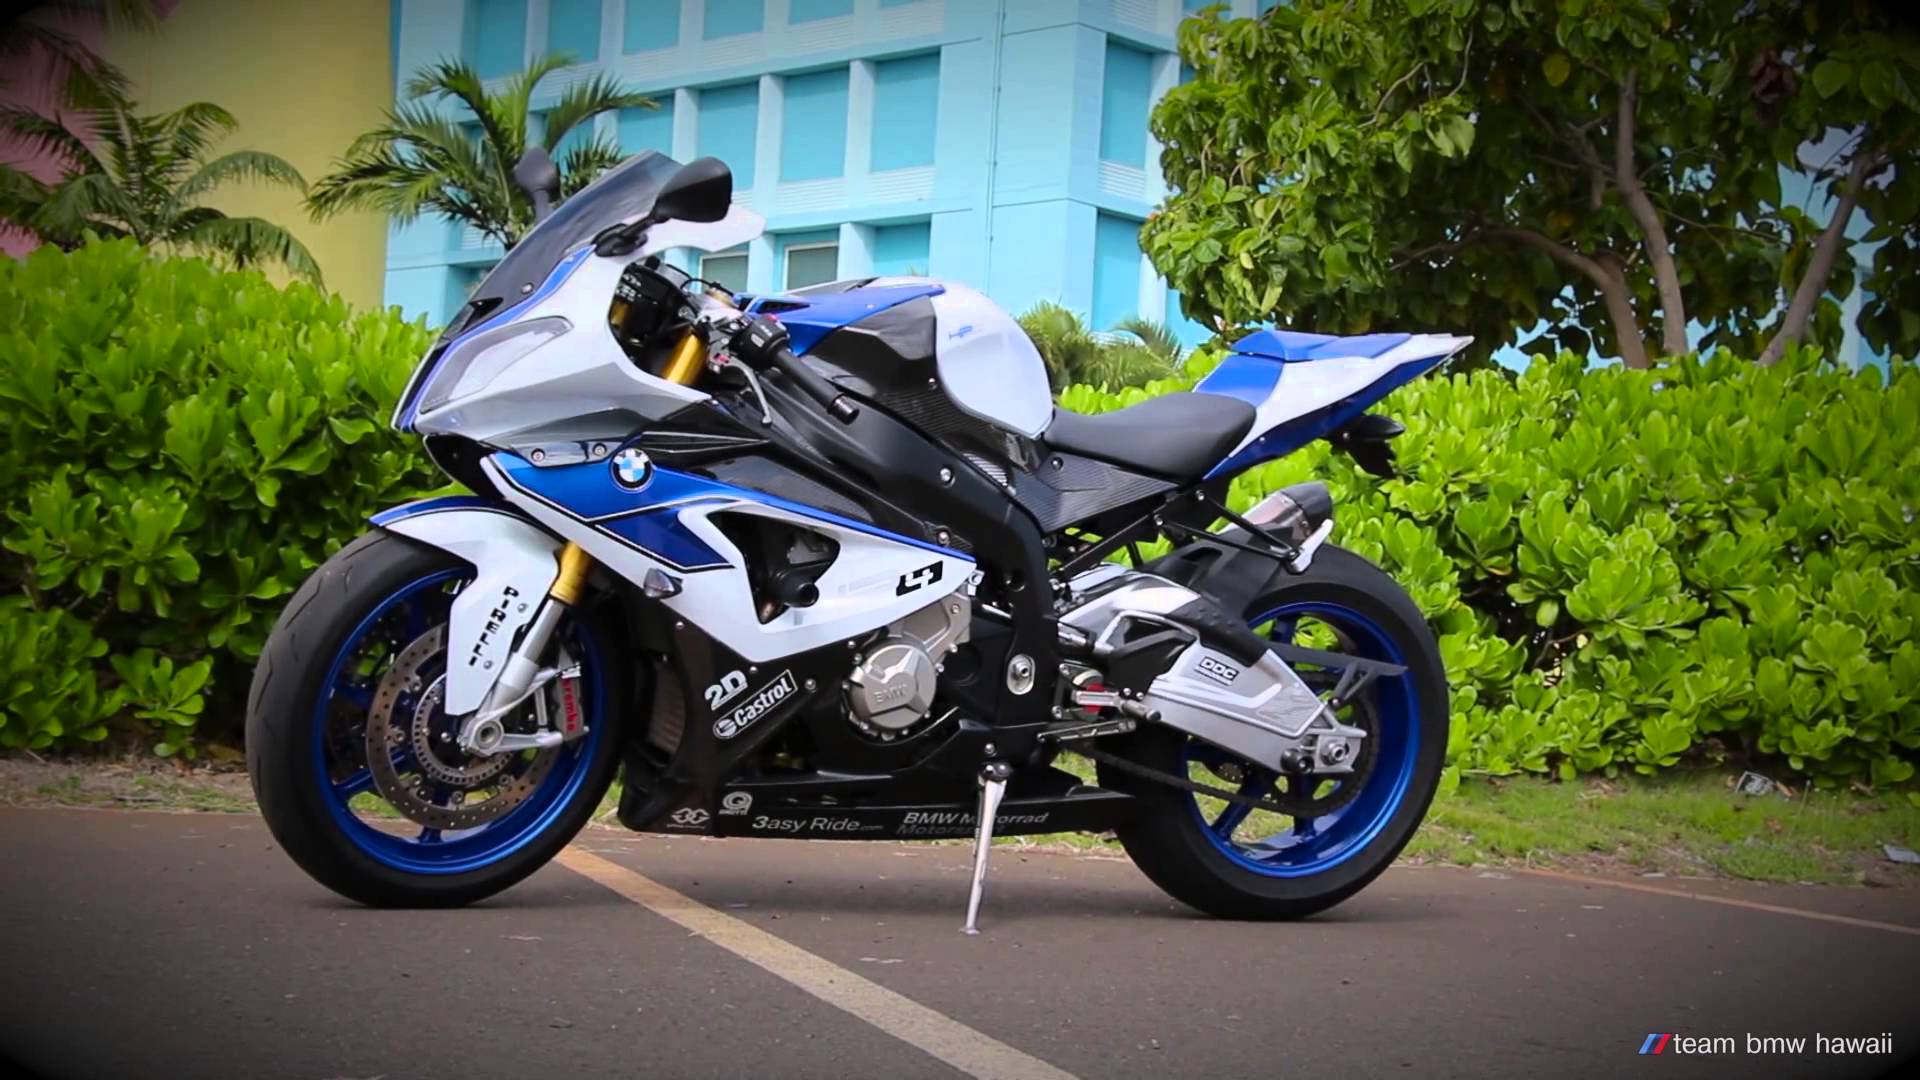 BMW HP4 Wallpaper, High Quality Pics of BMW HP4 in Super